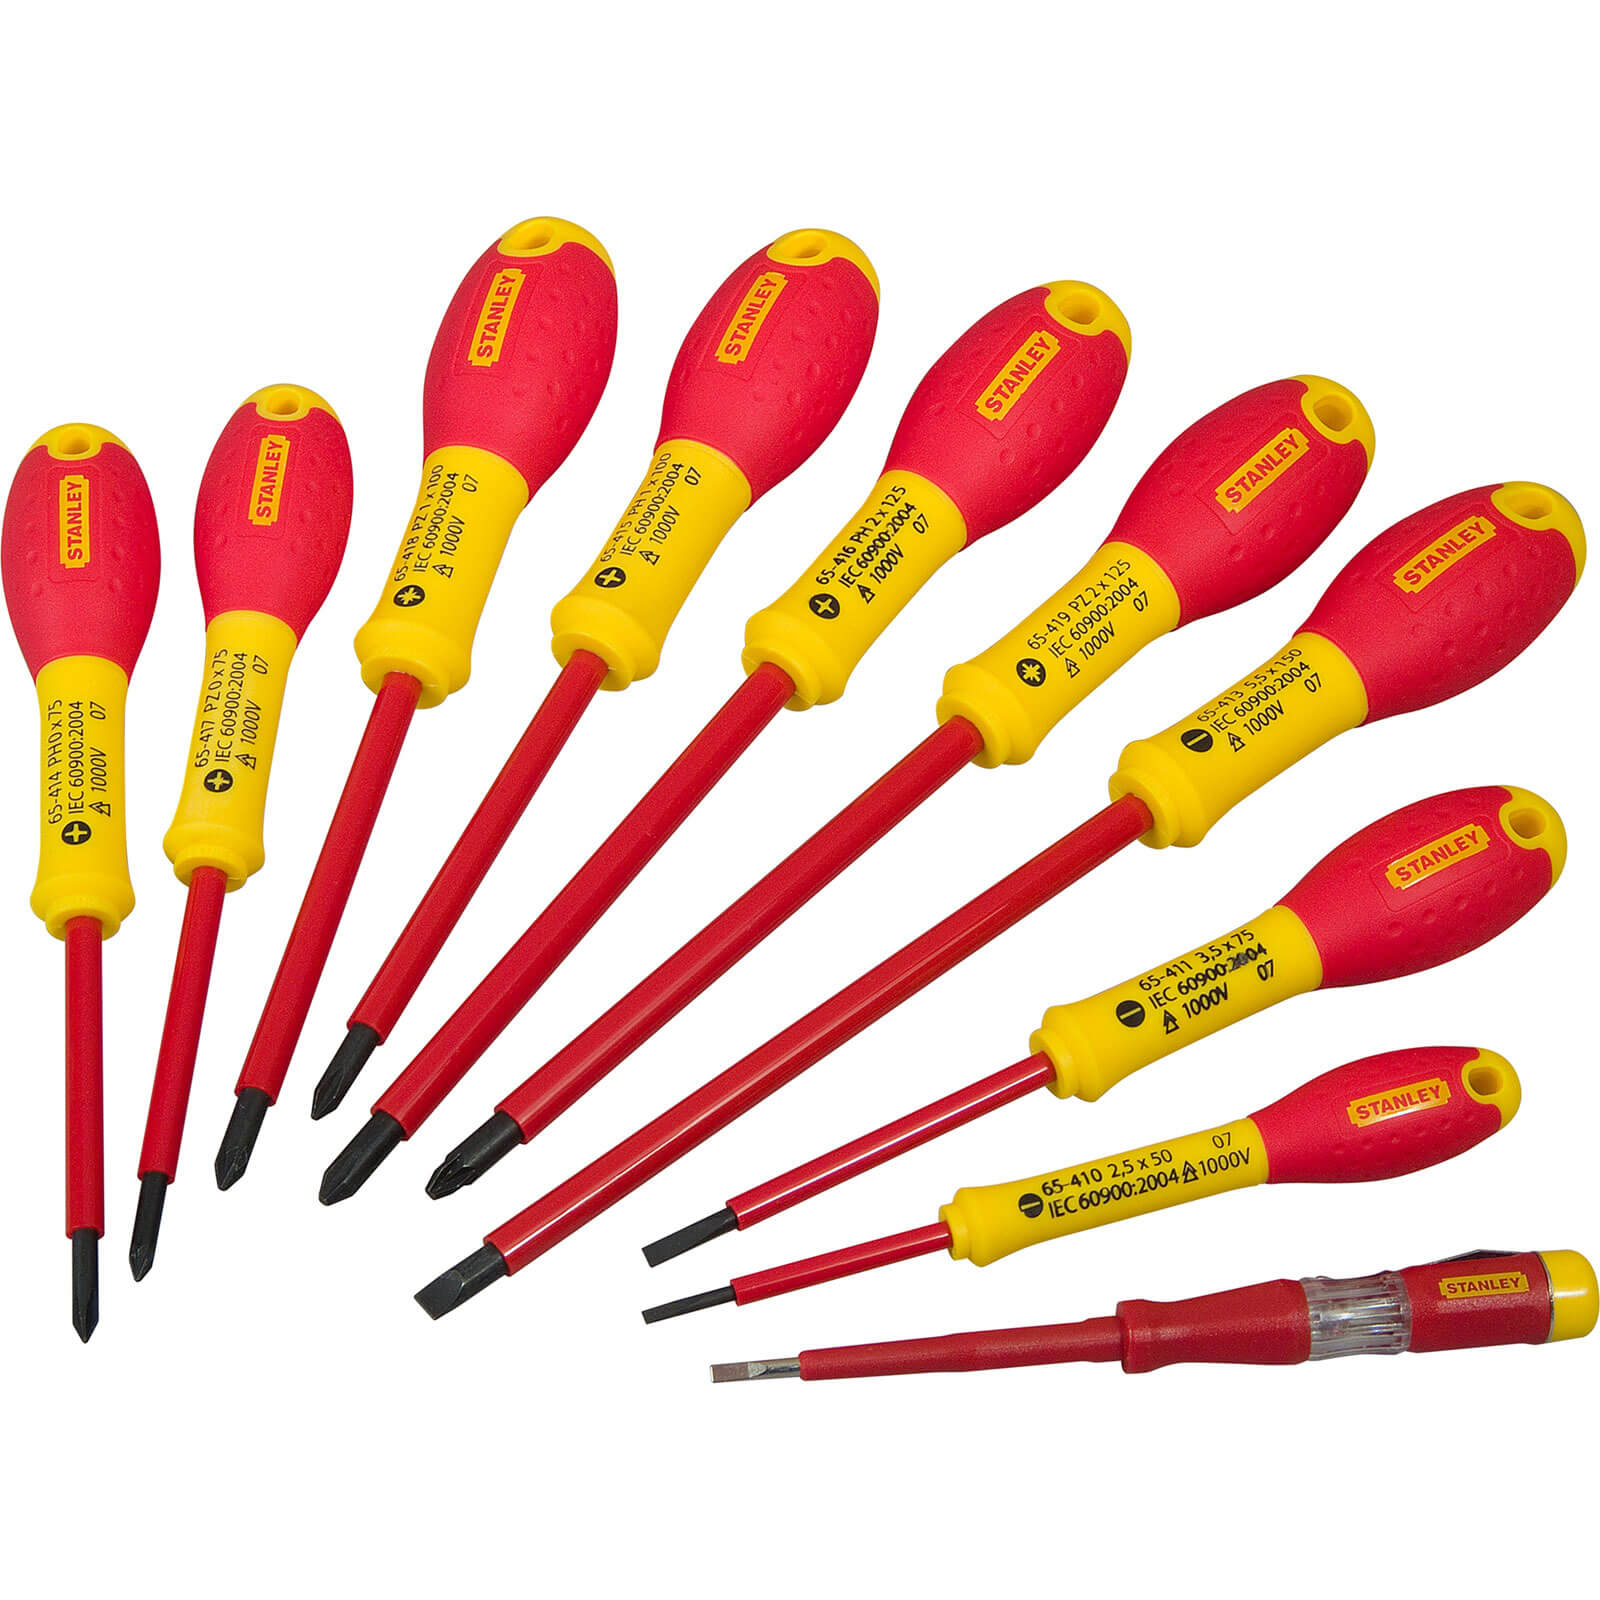 Stanley Fat Max Screwdriver Insulated Ph Ph0X75Mm-Red And Yellow